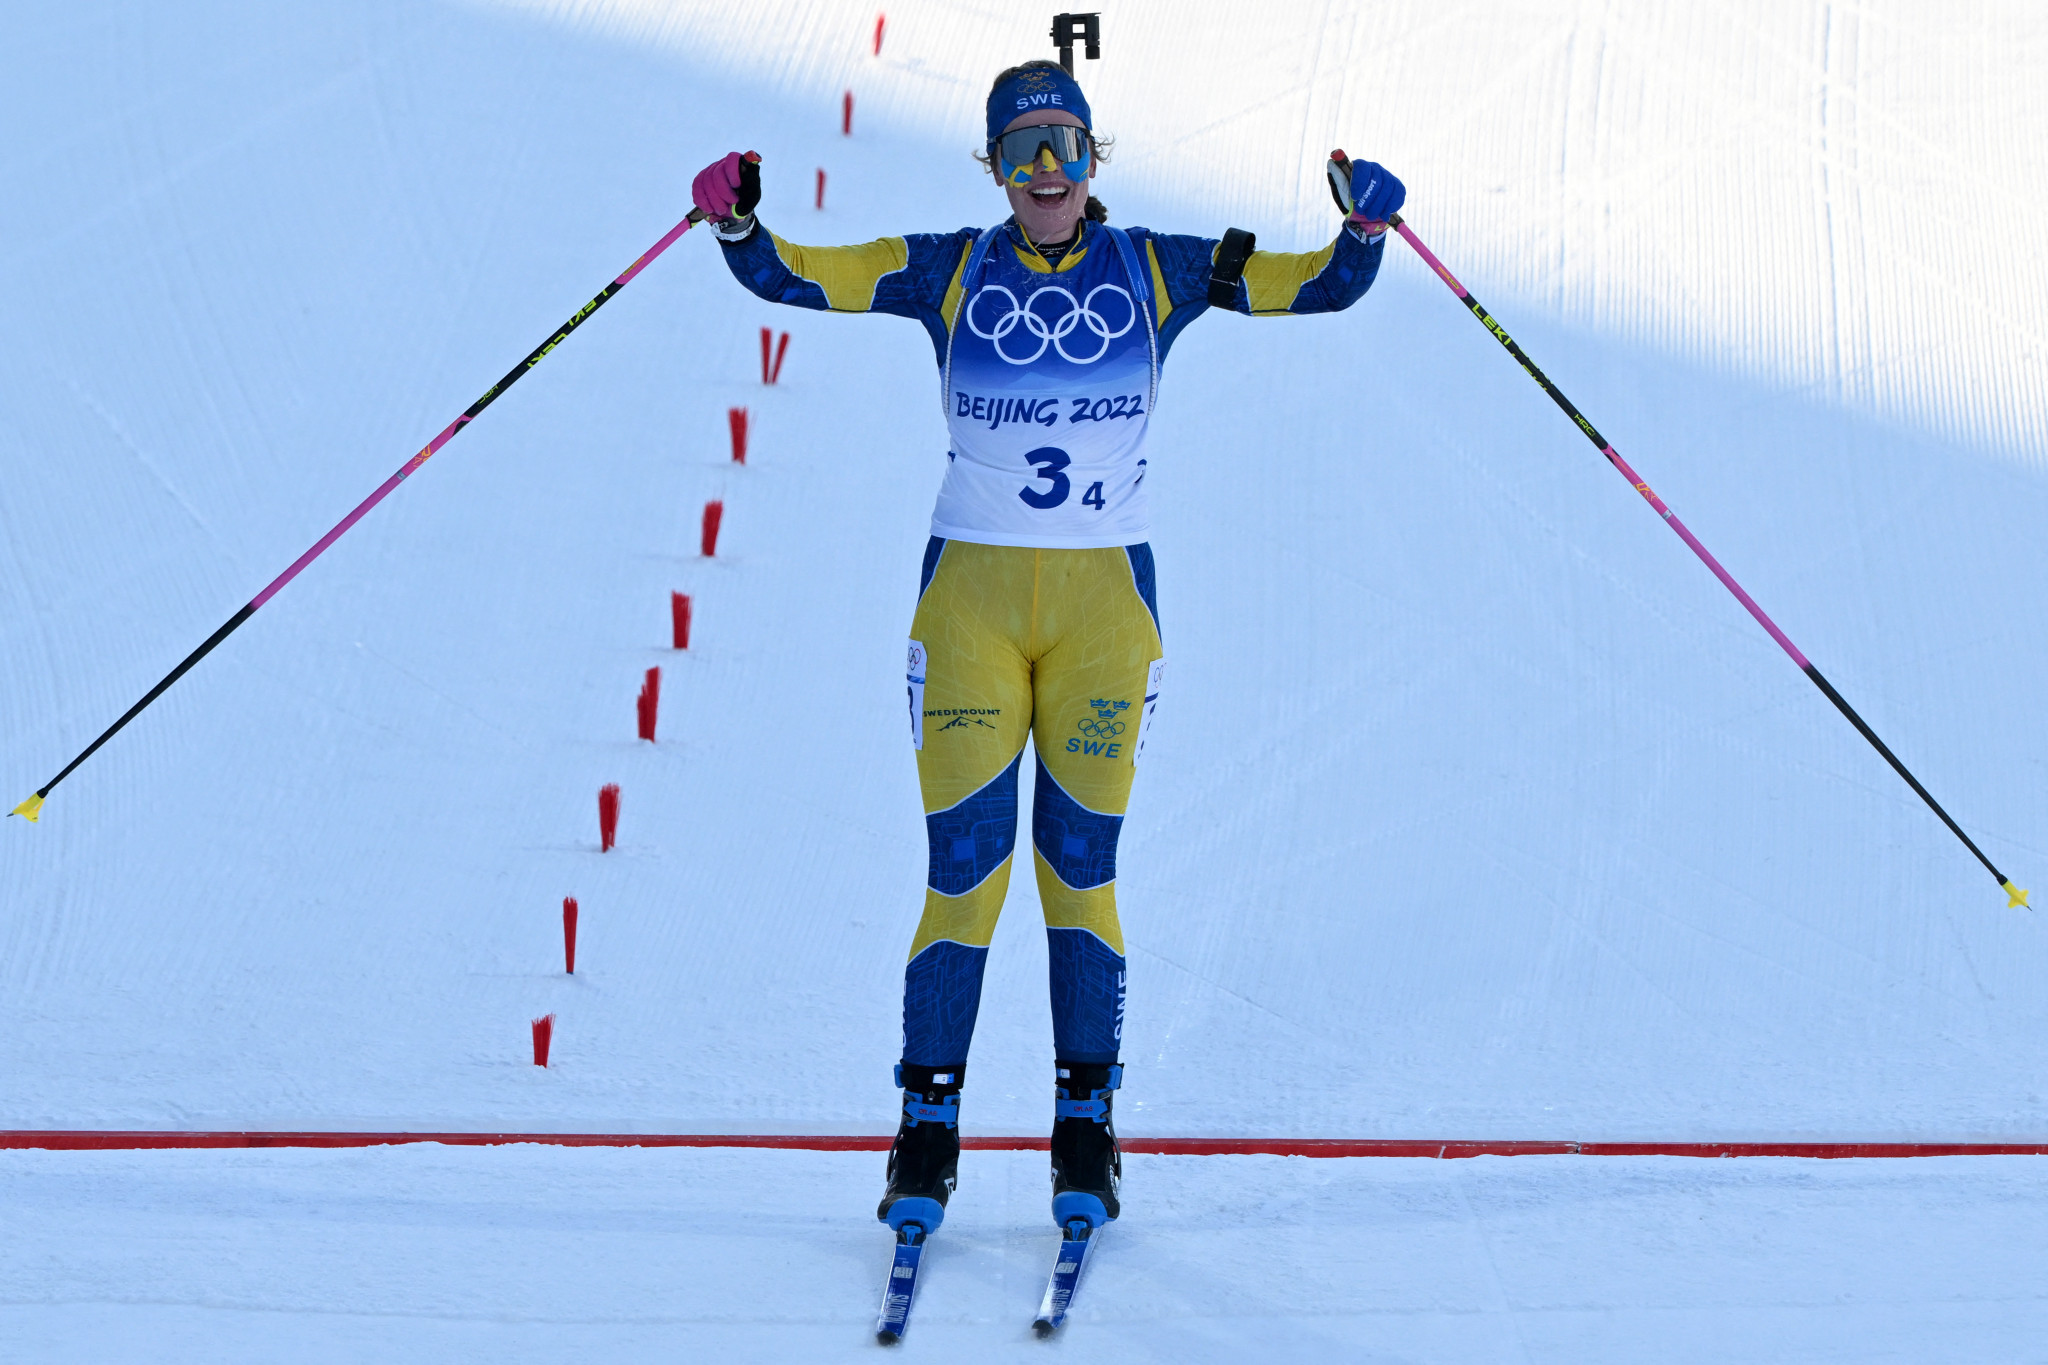 Not far behind, Elvira Öberg won a third medal of these Olympics as Sweden triumphed in the women's 4x6km biathlon race ©Getty Images